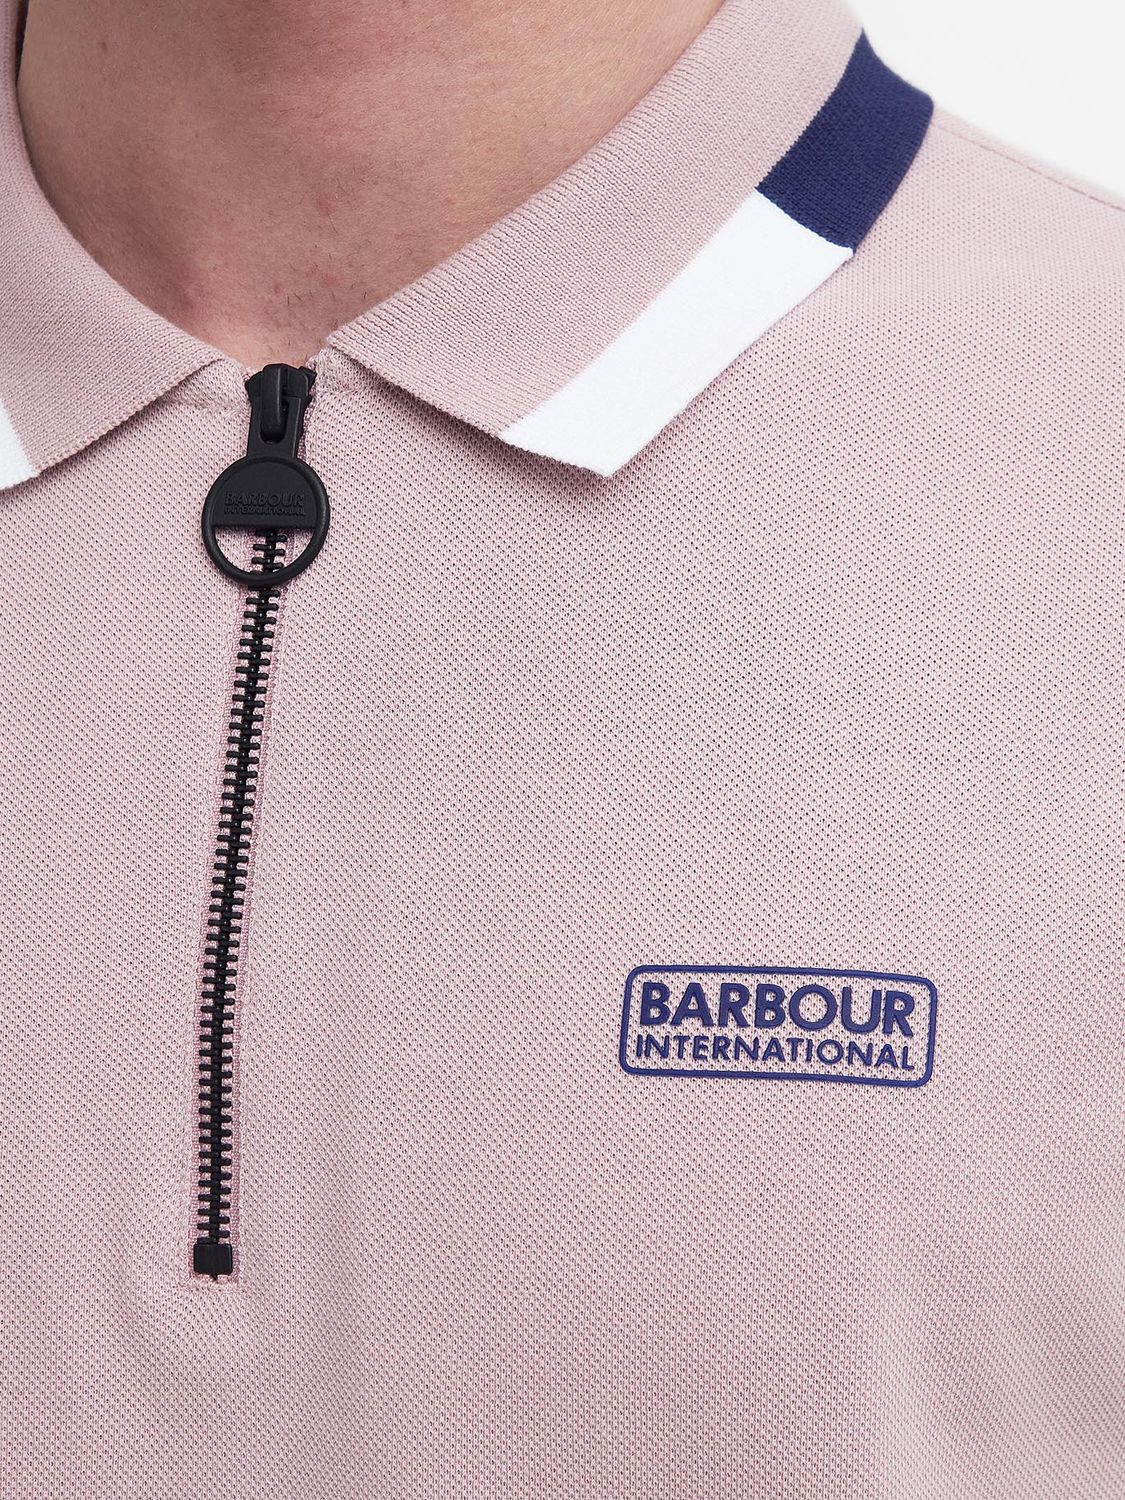 Barbour International Smith Polo Shirt, Dusk Pink, S